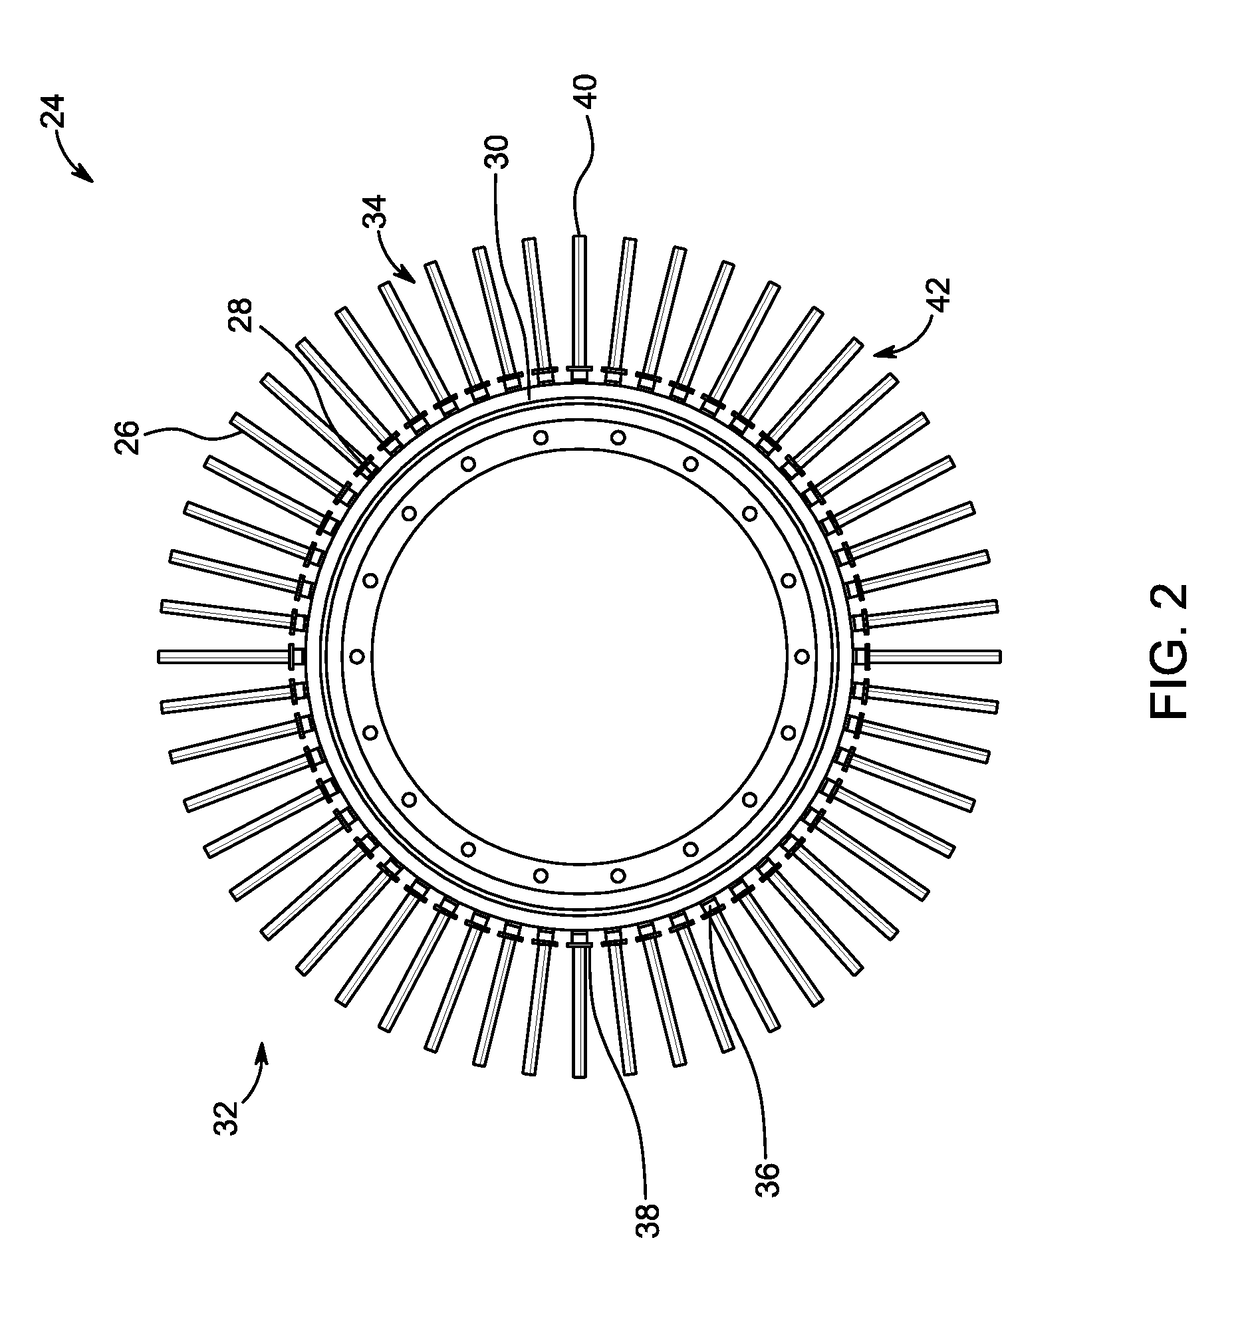 Bladed disc and method of manufacturing the same